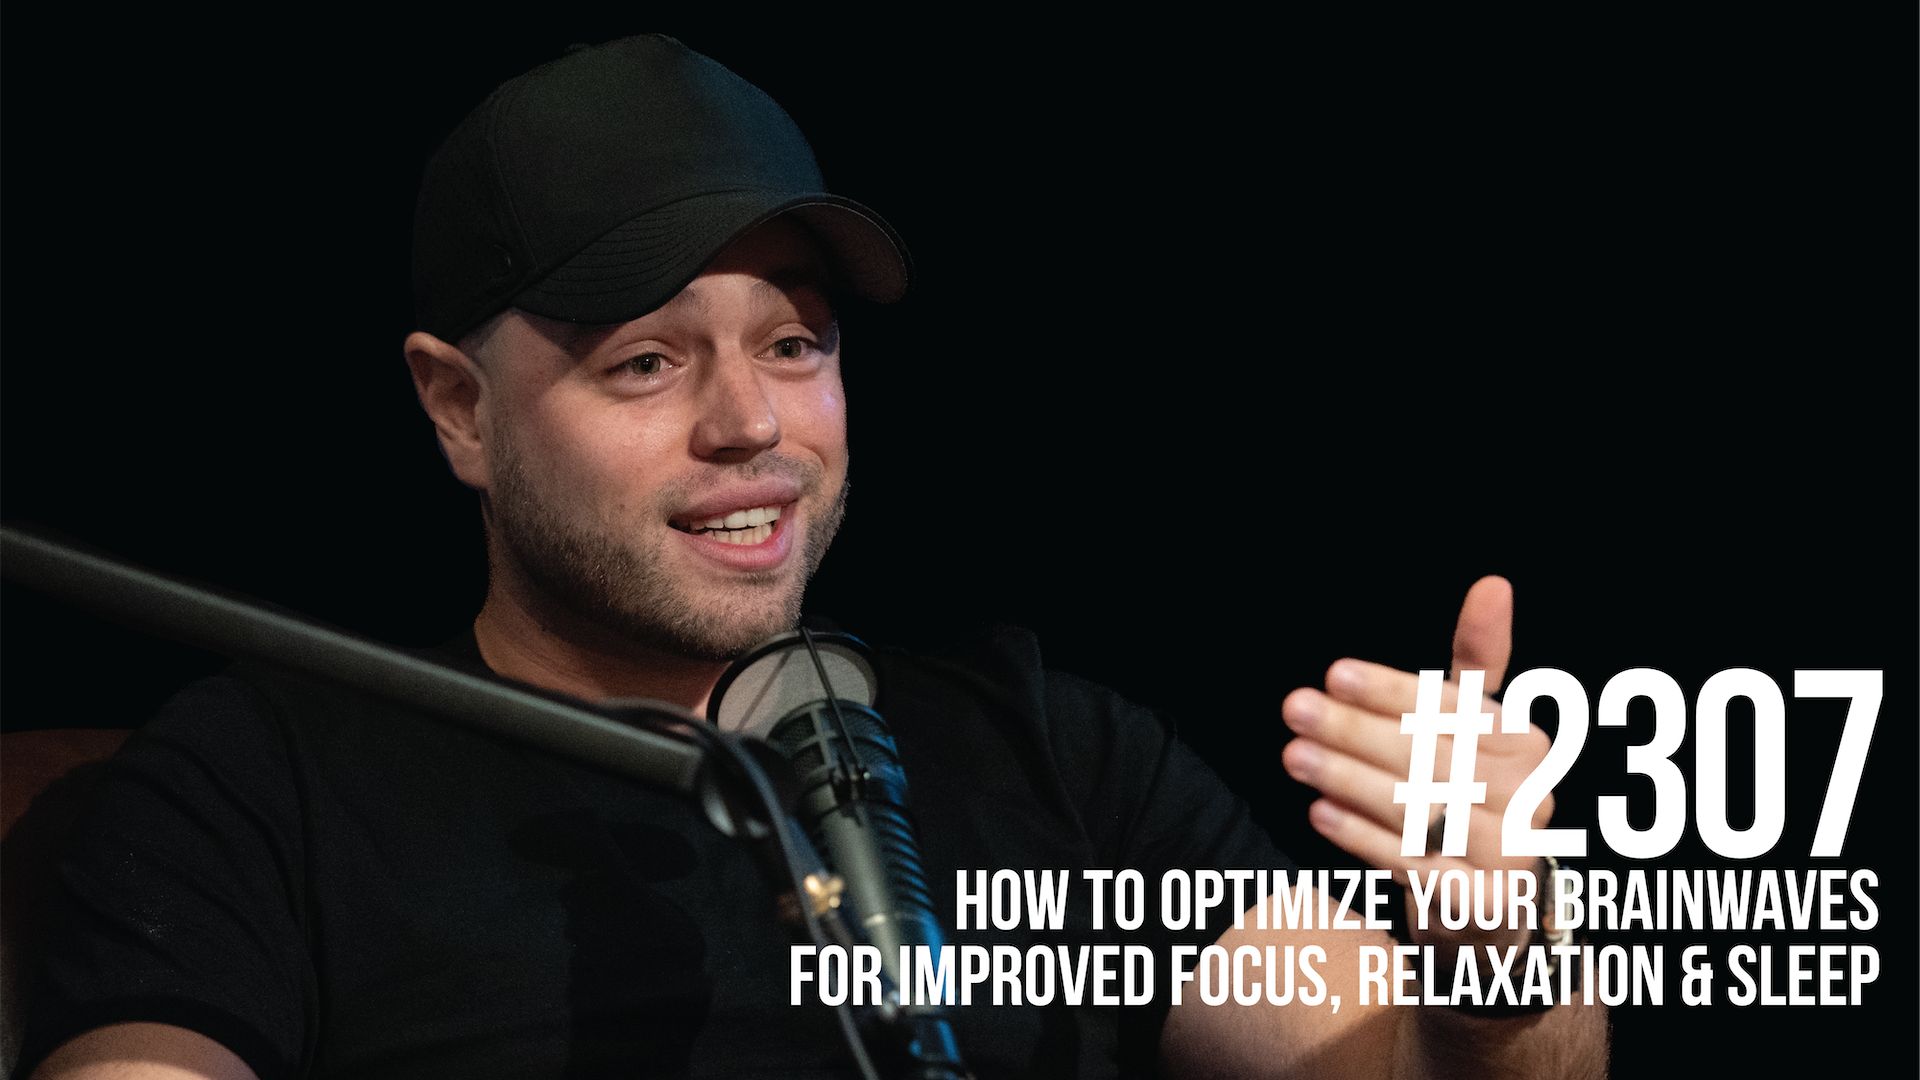 2307: How to Optimize Your Brainwaves for Improved Focus, Relaxation & Sleep